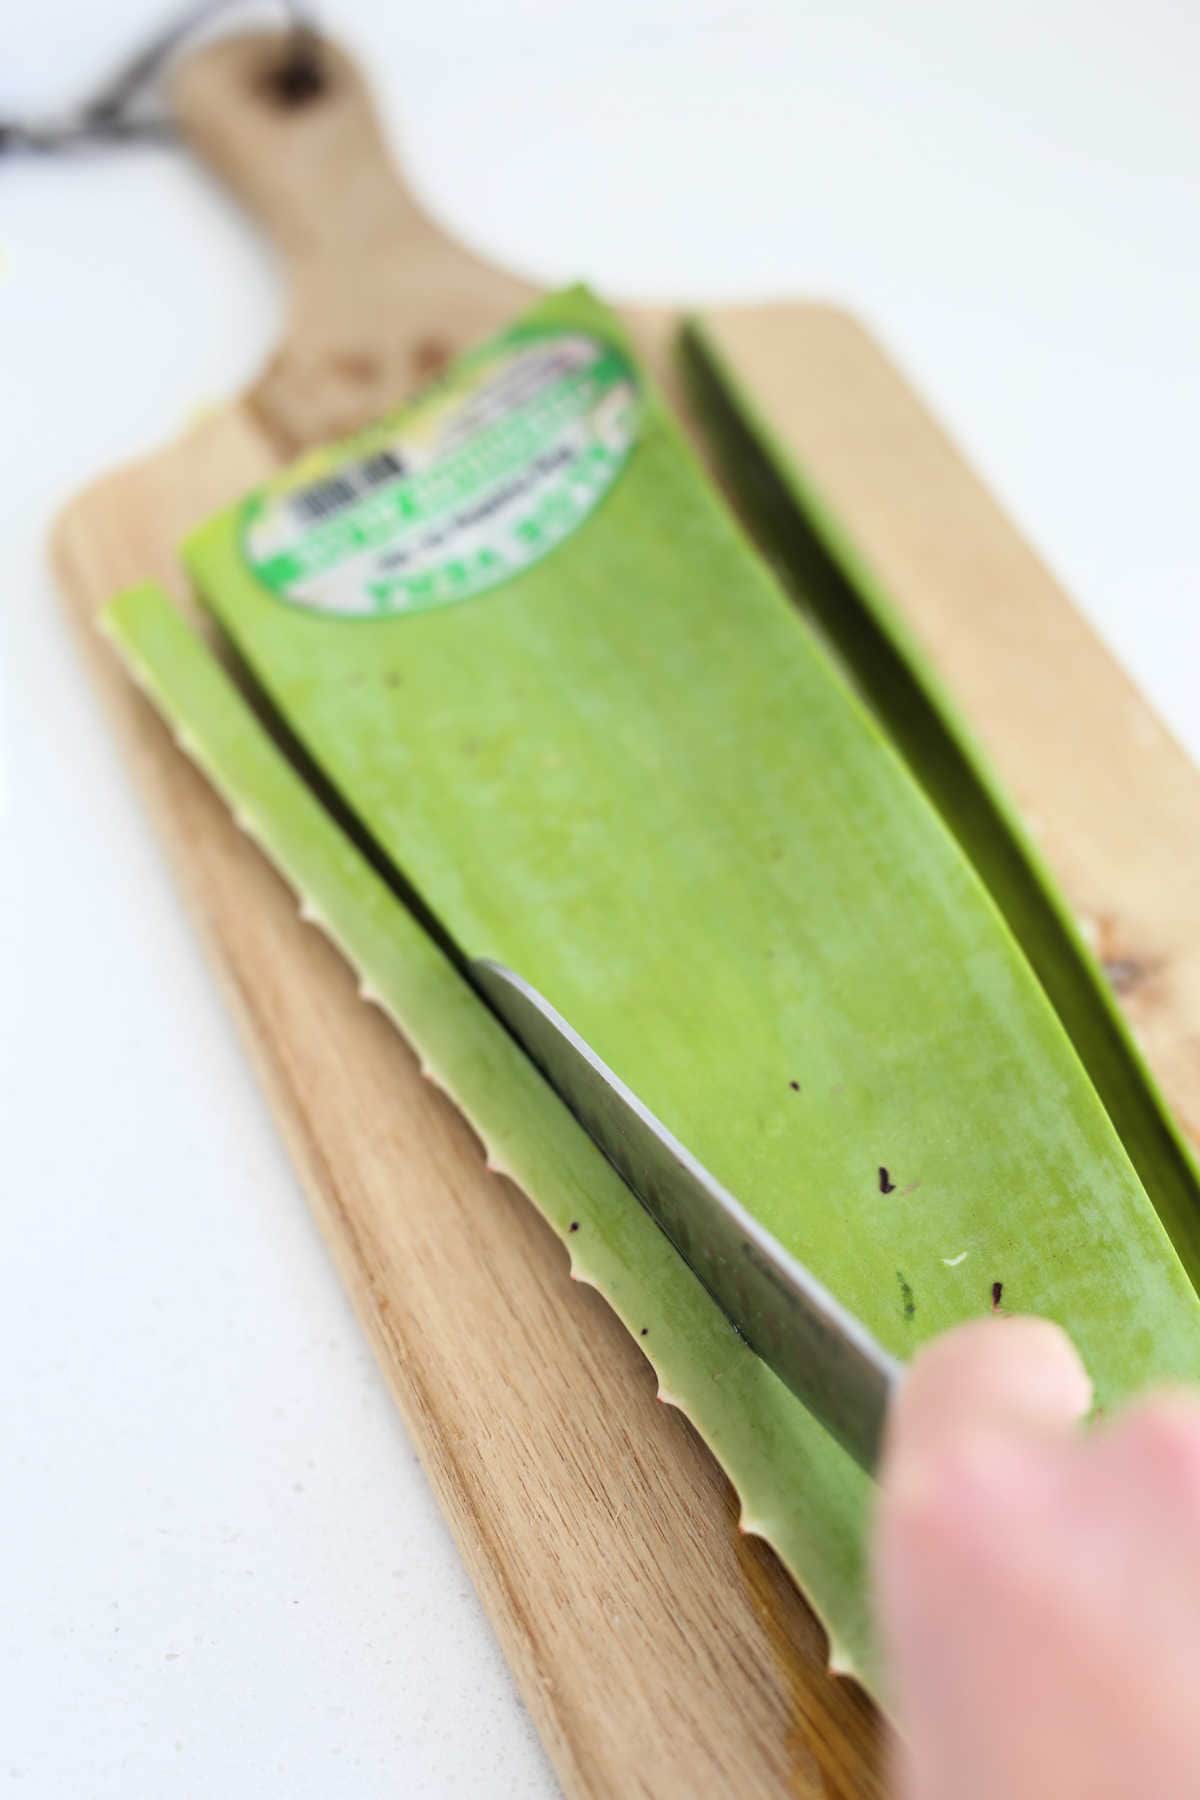 Knife cutting the spikes off of an aloe leaf.